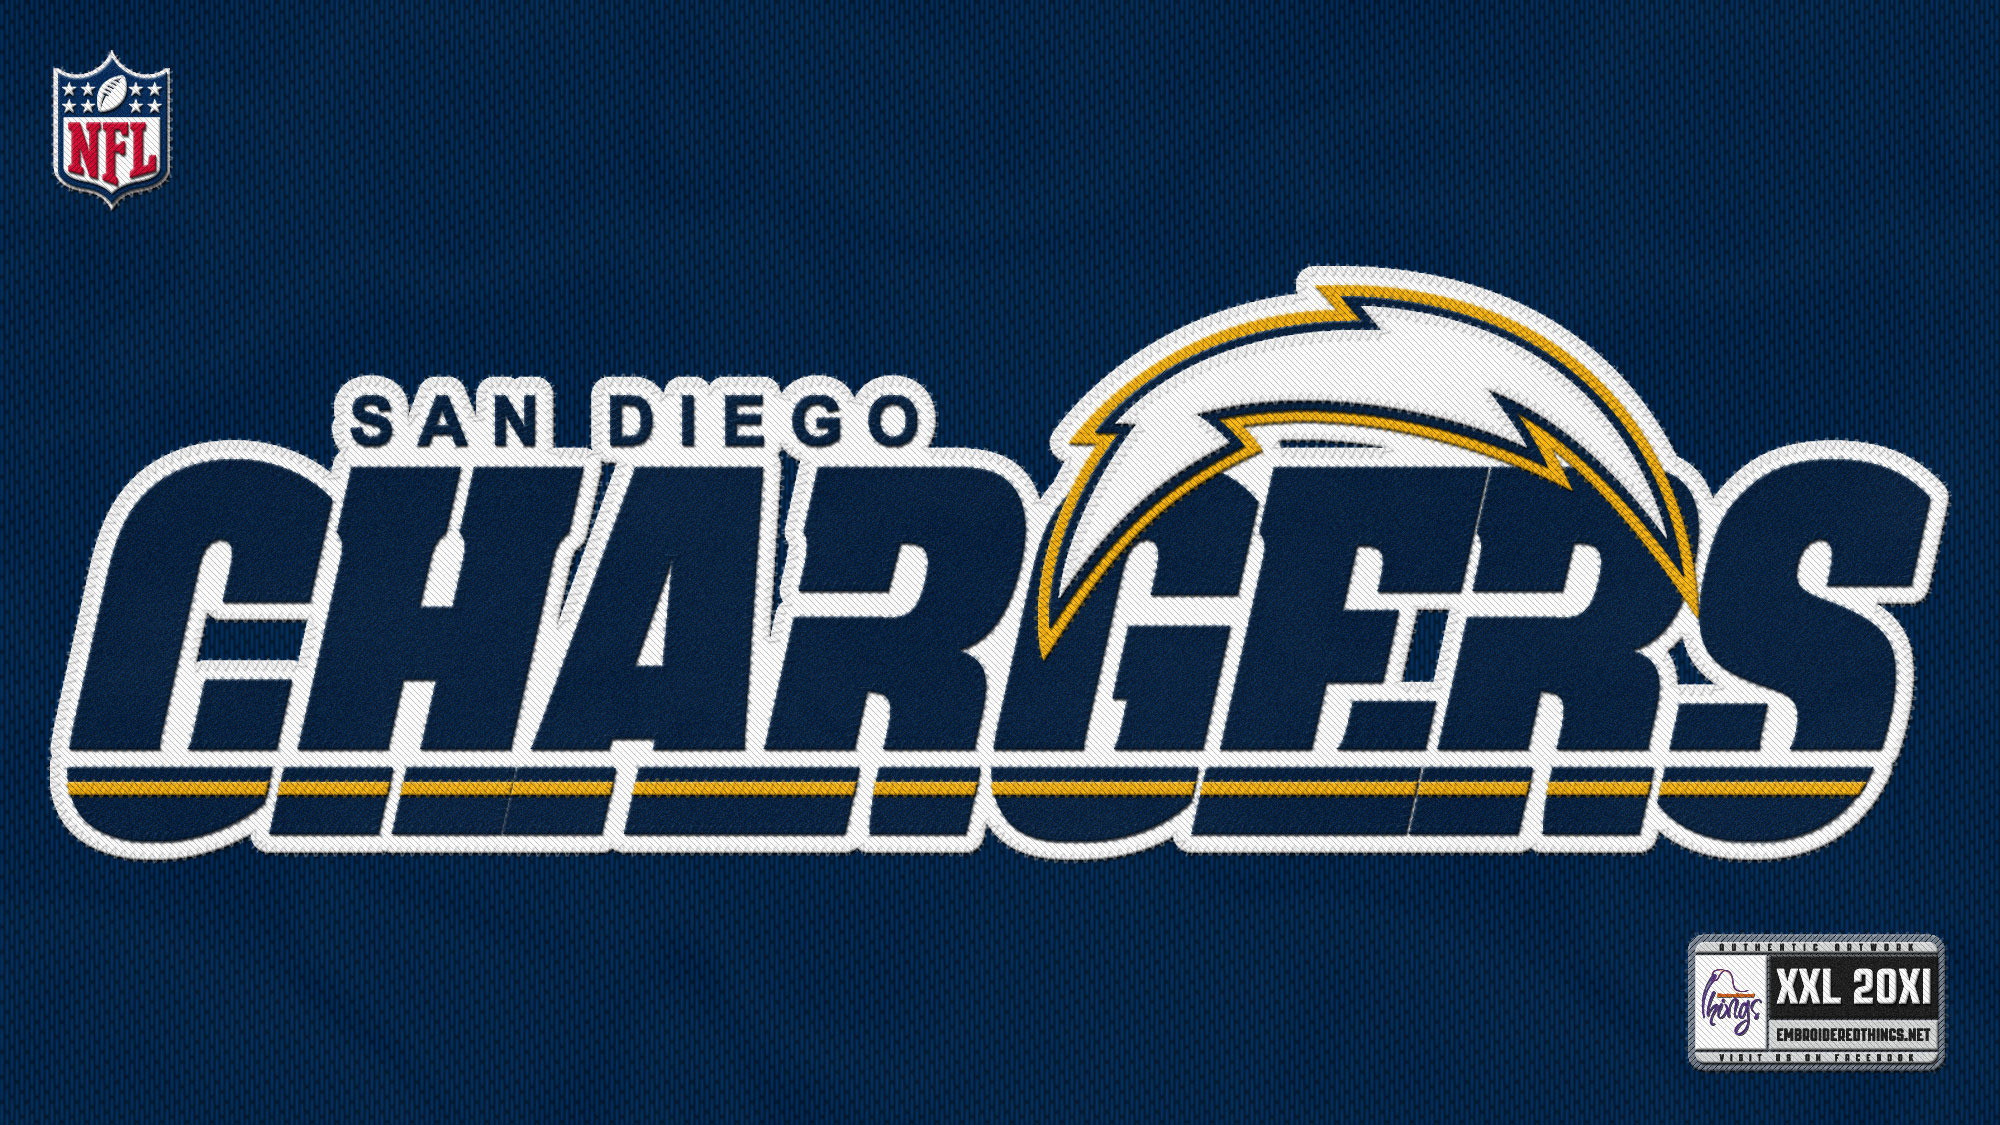 san, Diego, Chargers, Nfl, Football Wallpaper HD / Desktop and Mobile Background